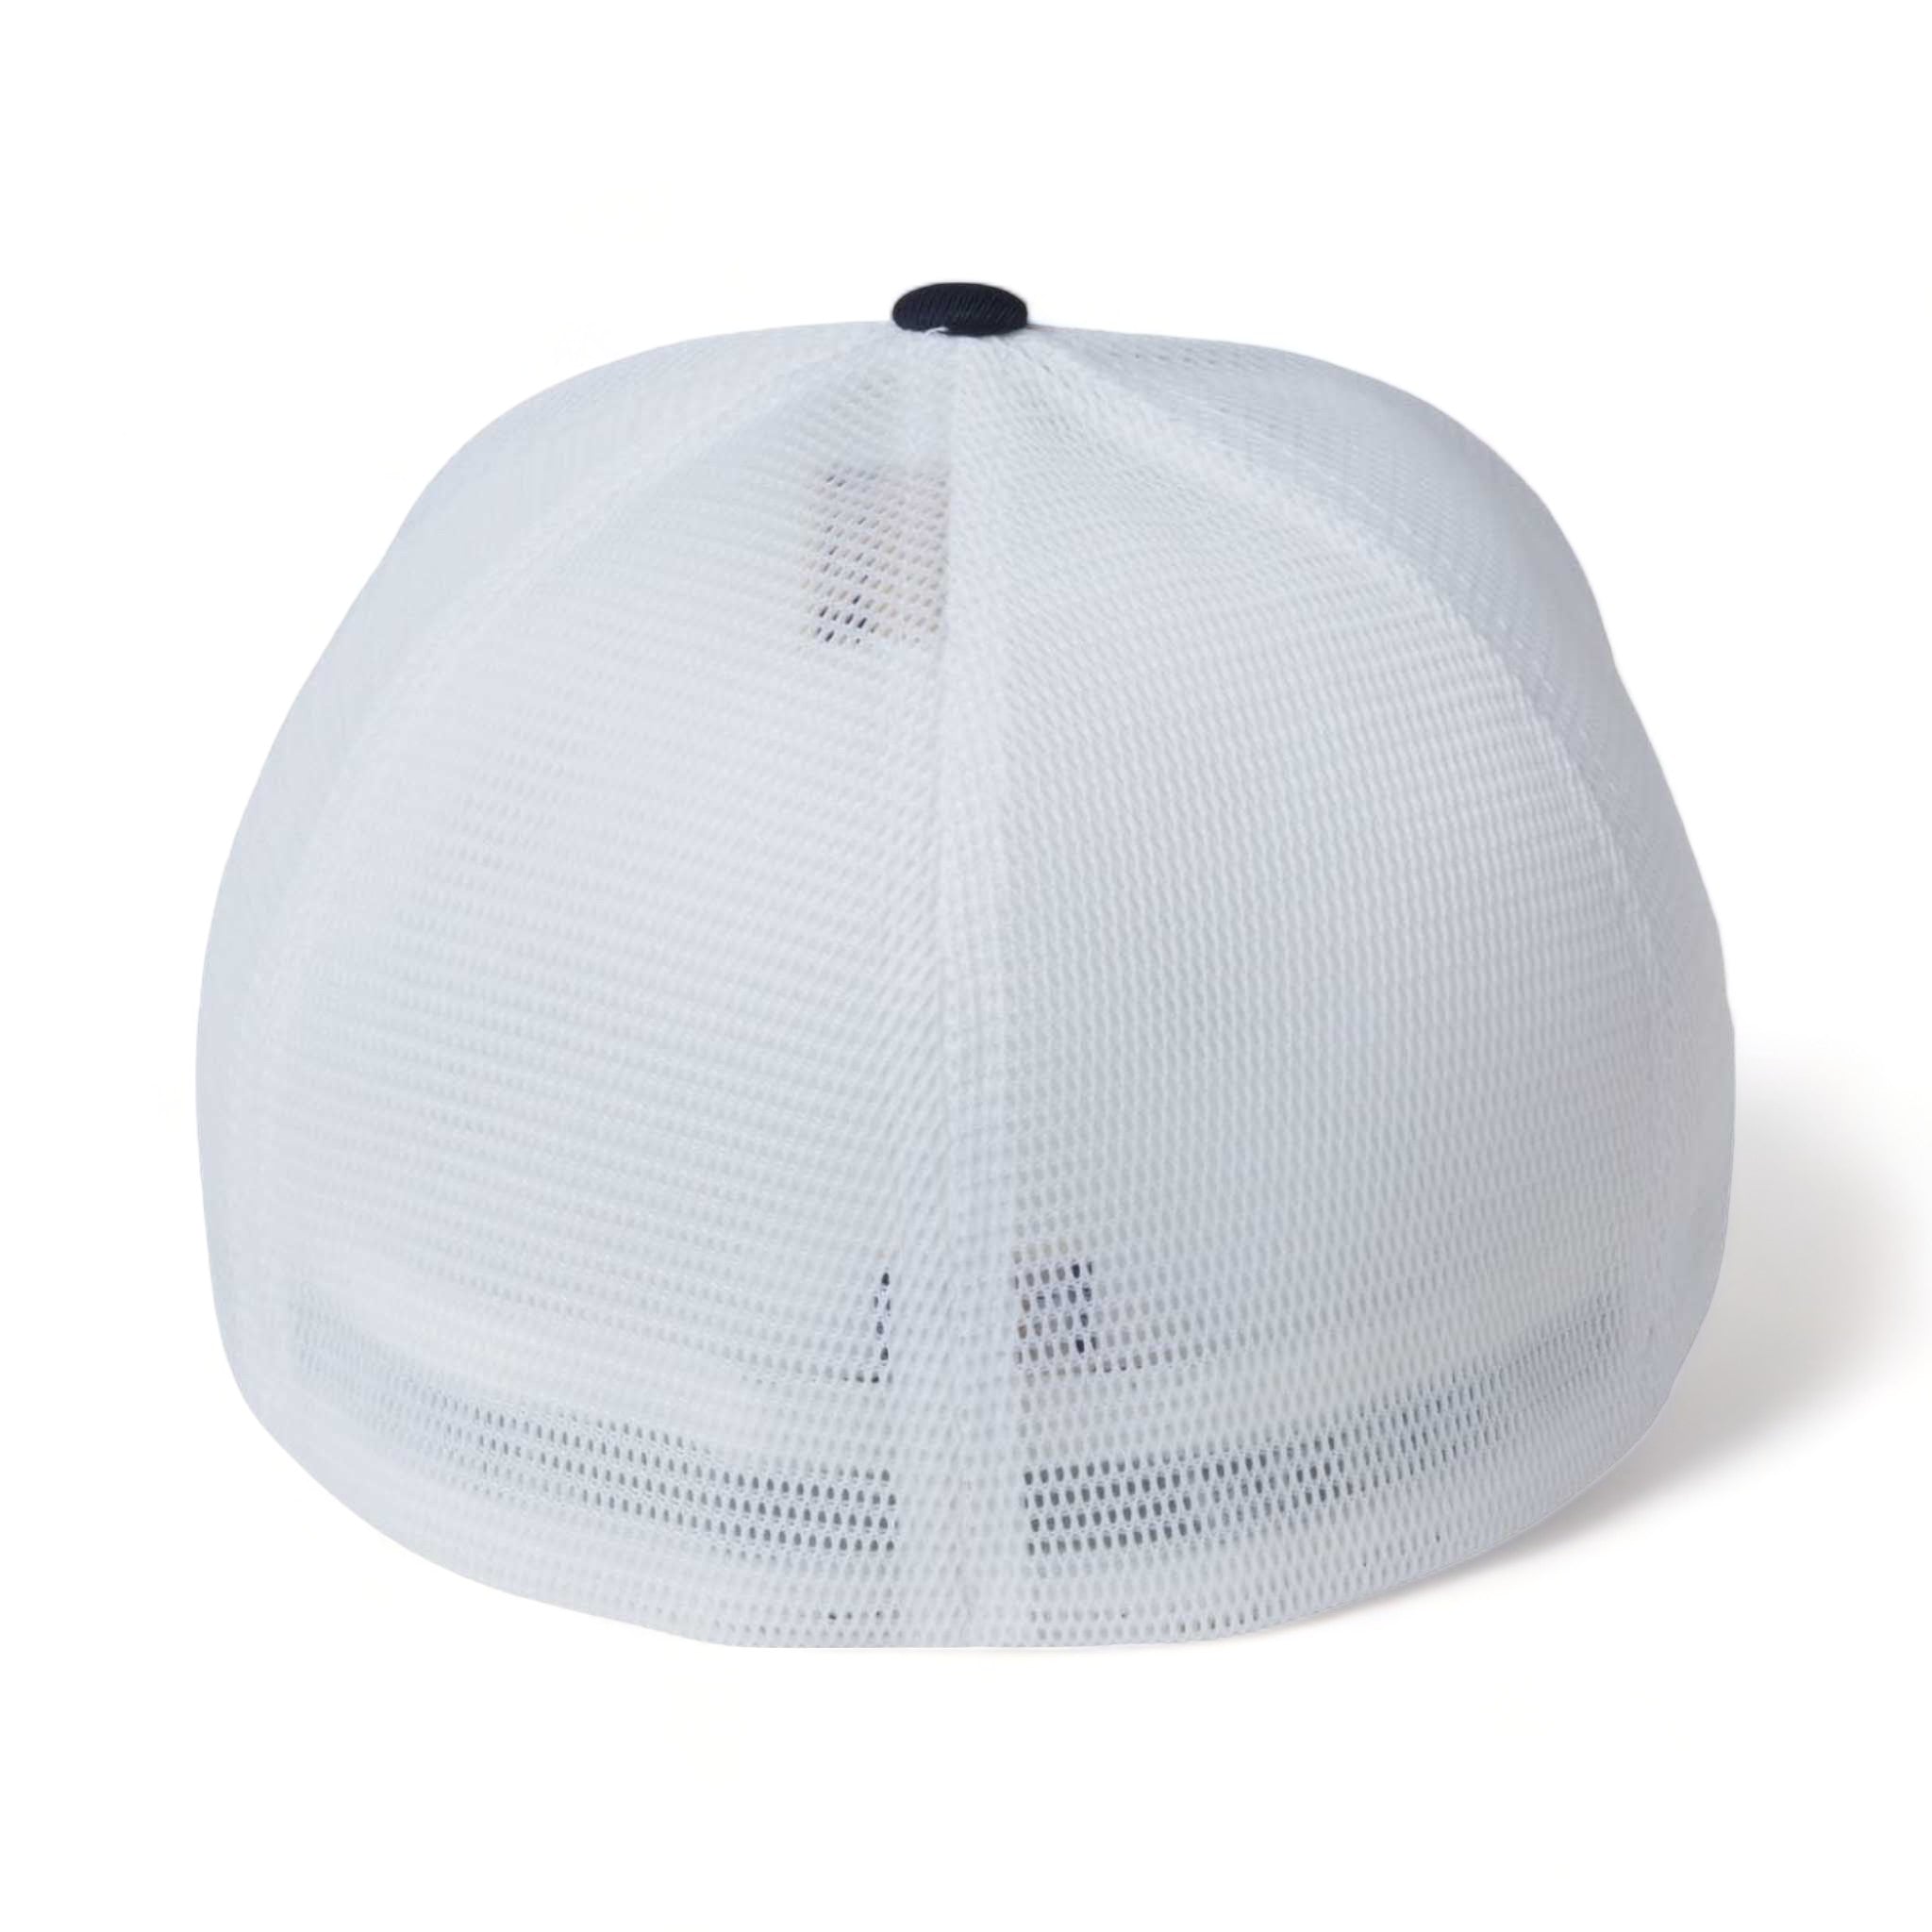 Back view of Flexfit 5511UP custom hat in true navy and white